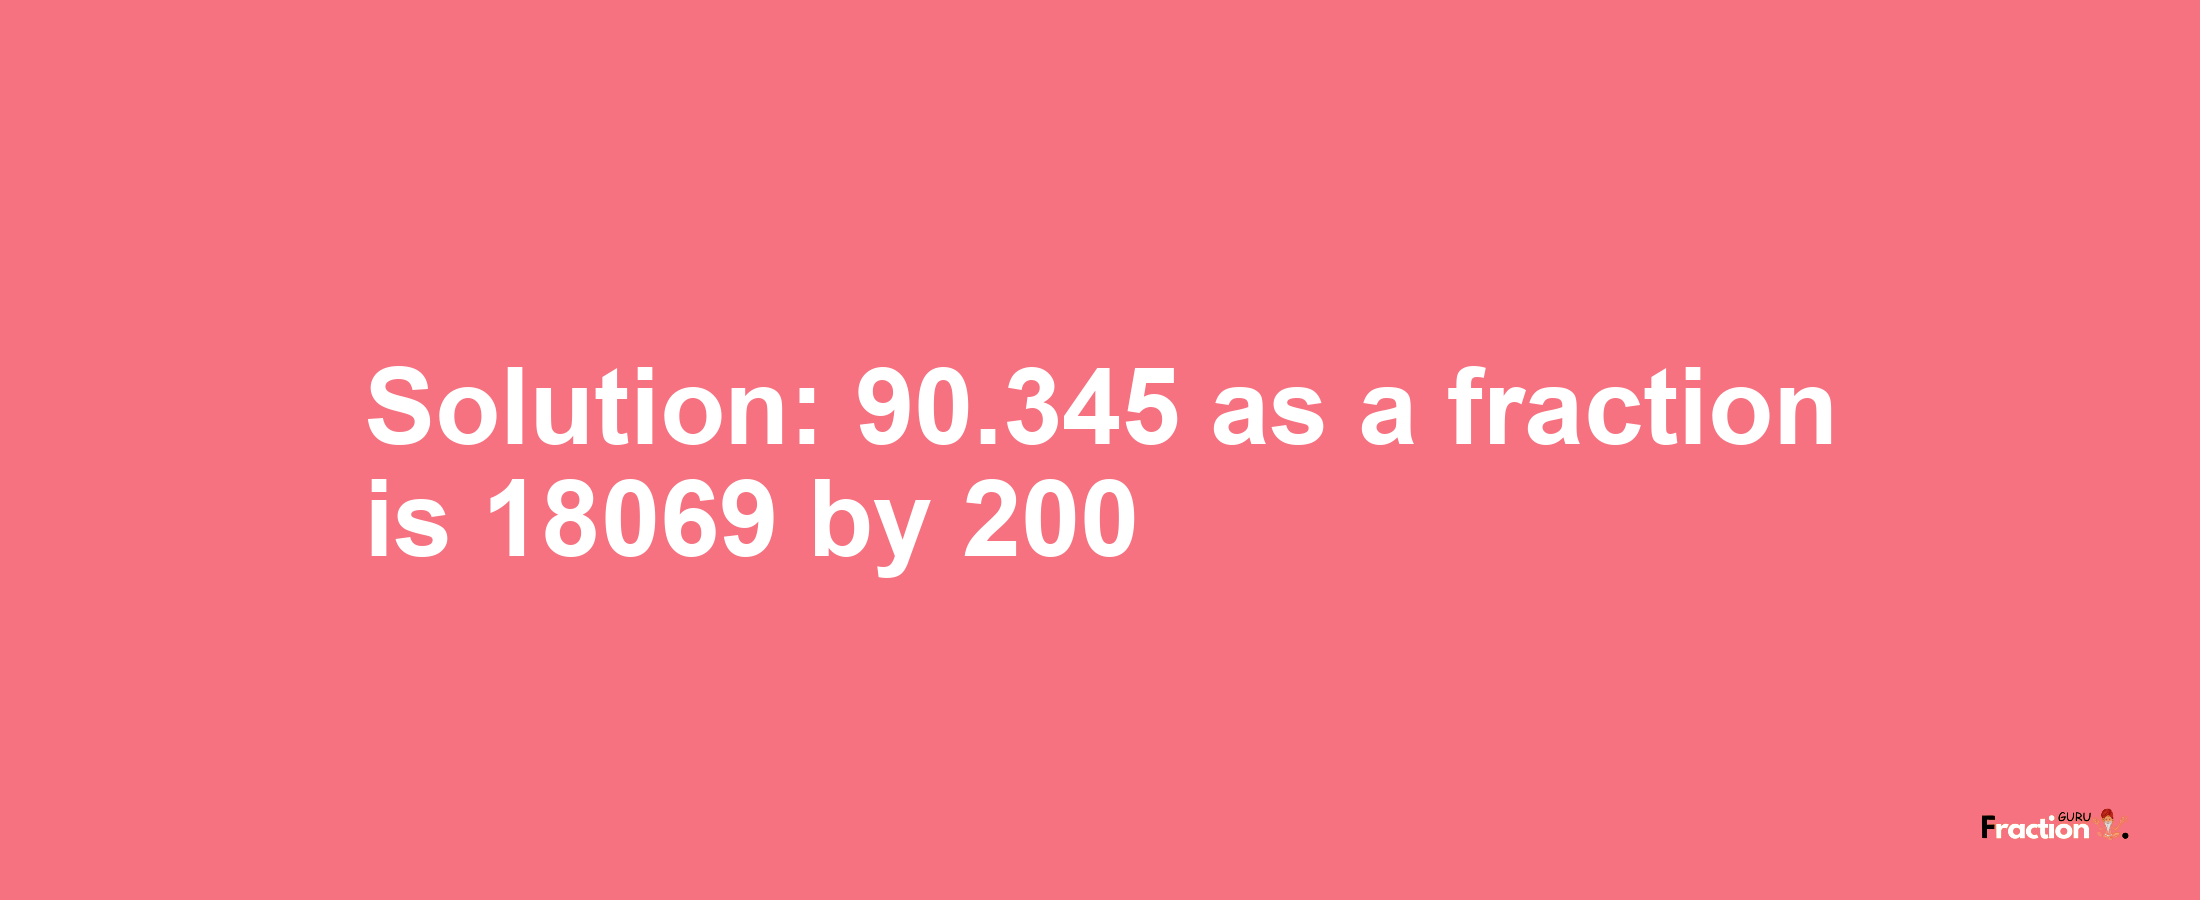 Solution:90.345 as a fraction is 18069/200